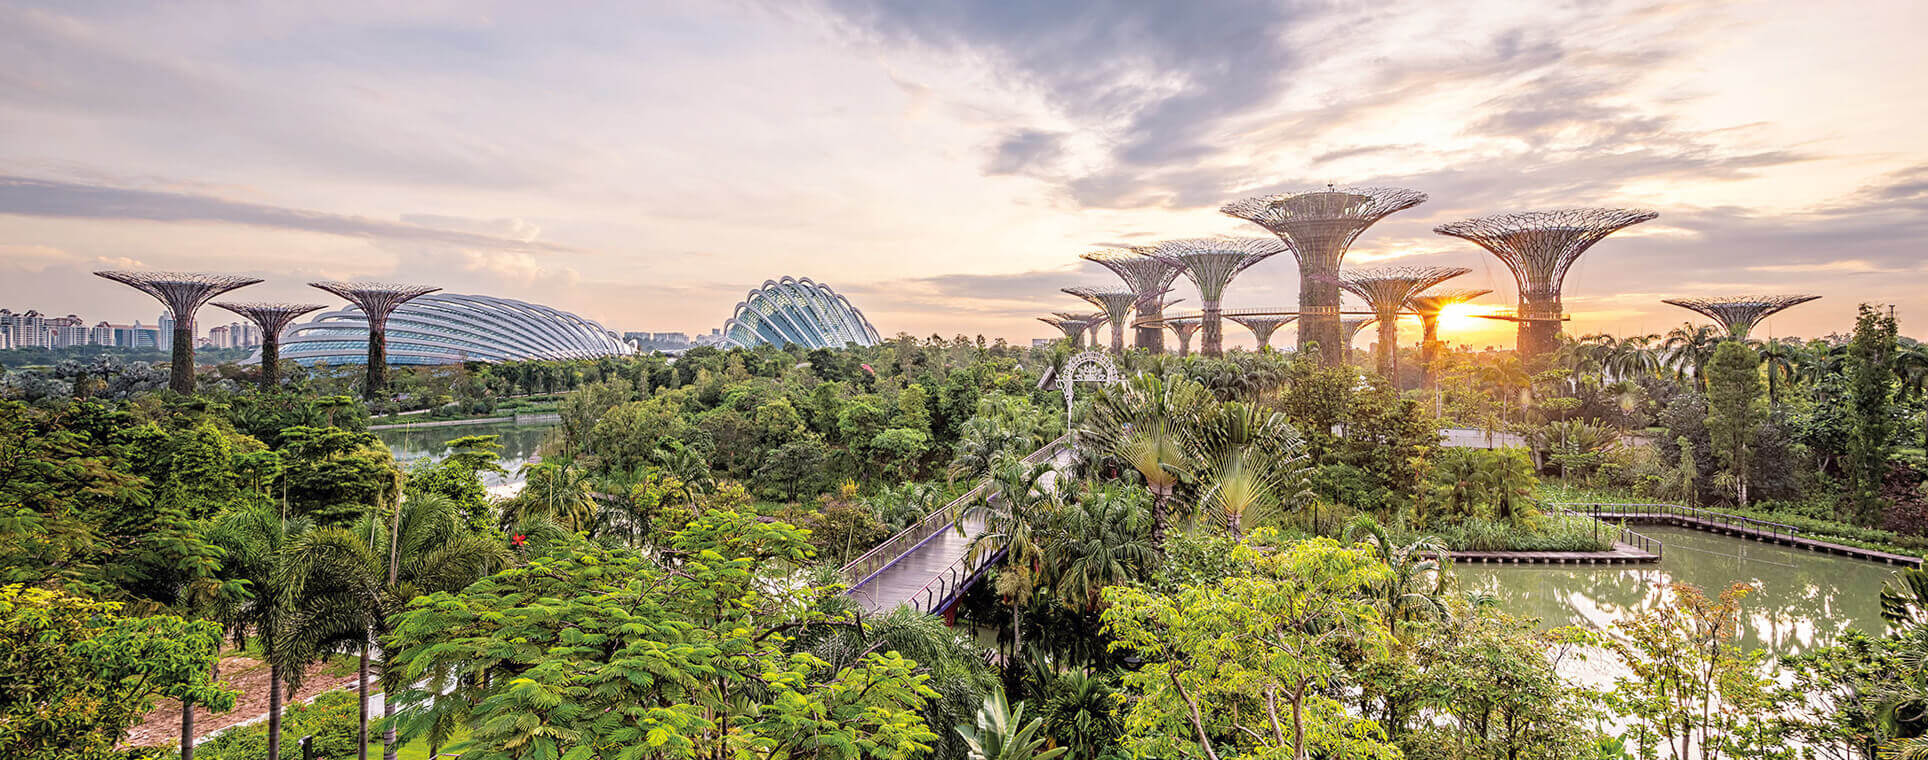 Singapore: A Blend Of Nature, Culture And Modernity!